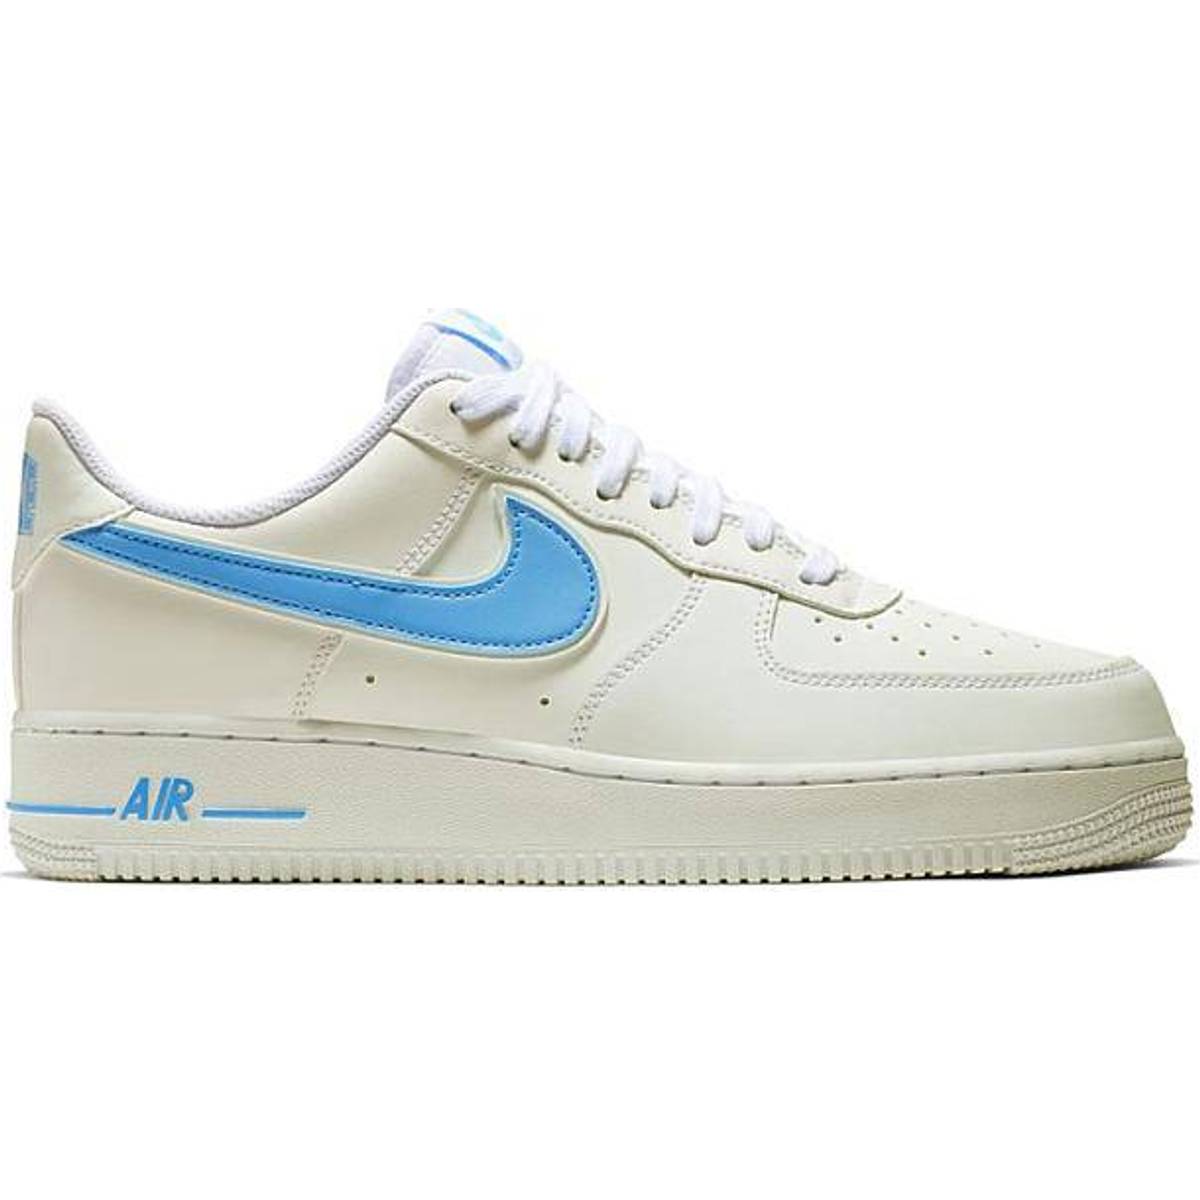 nike air force pricerunner,Free delivery,zwh.com.pk